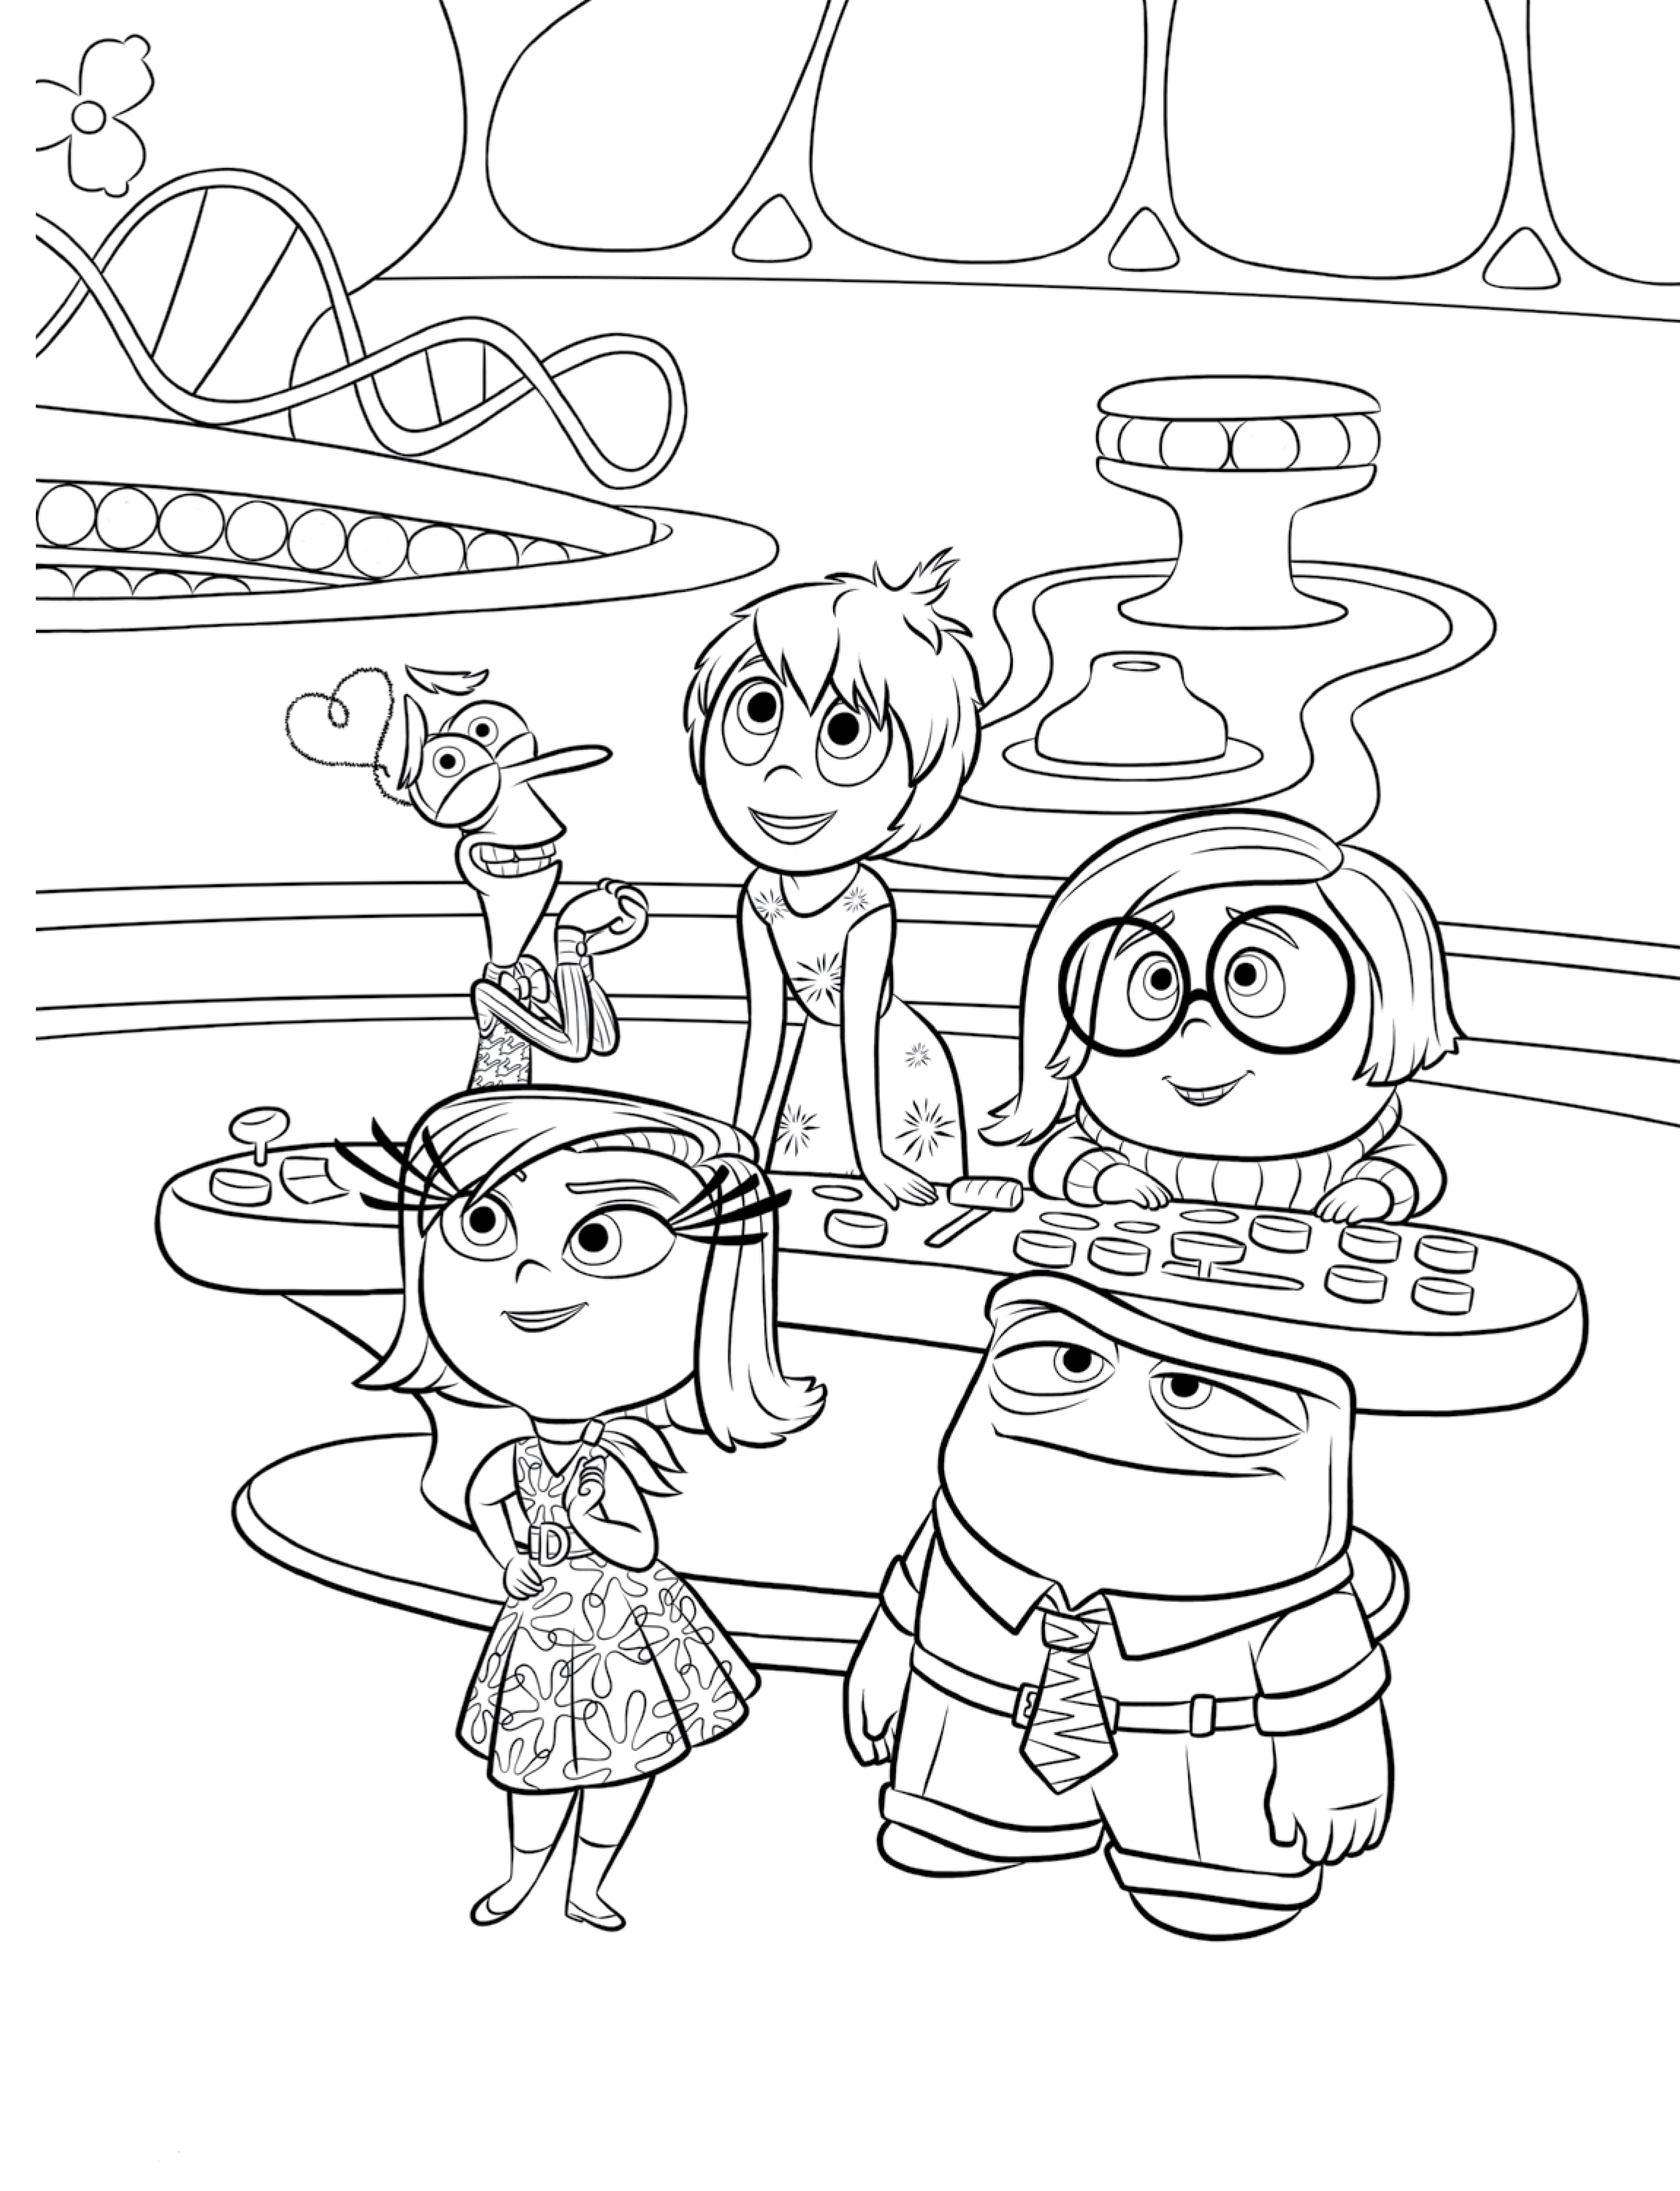 Download Inside Out Coloring Pages - Best Coloring Pages For Kids